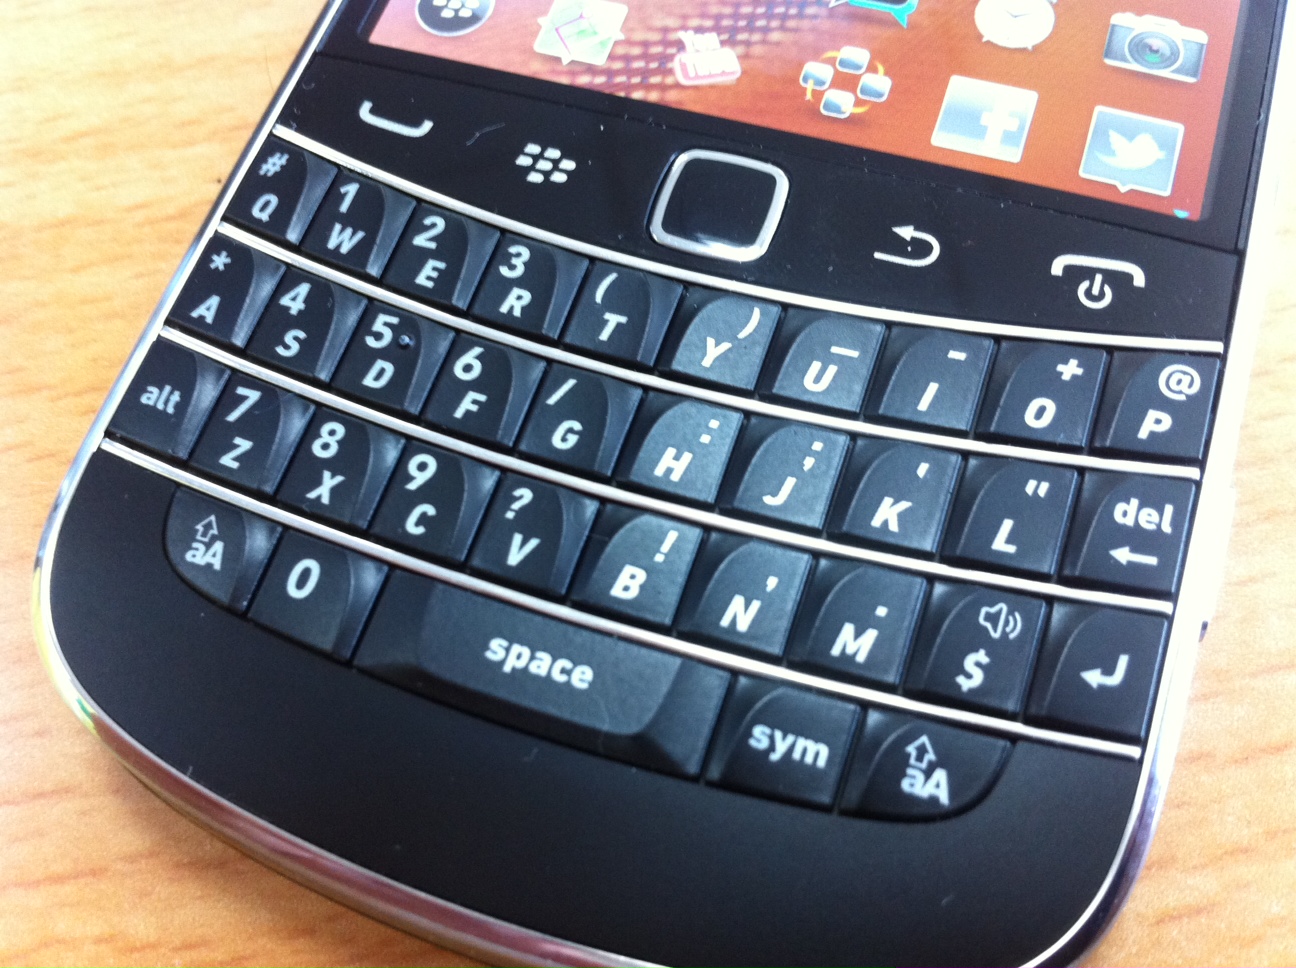 BlackBerry Bold 9900 Susceptible to Keyboard Damage from Supplied Holster